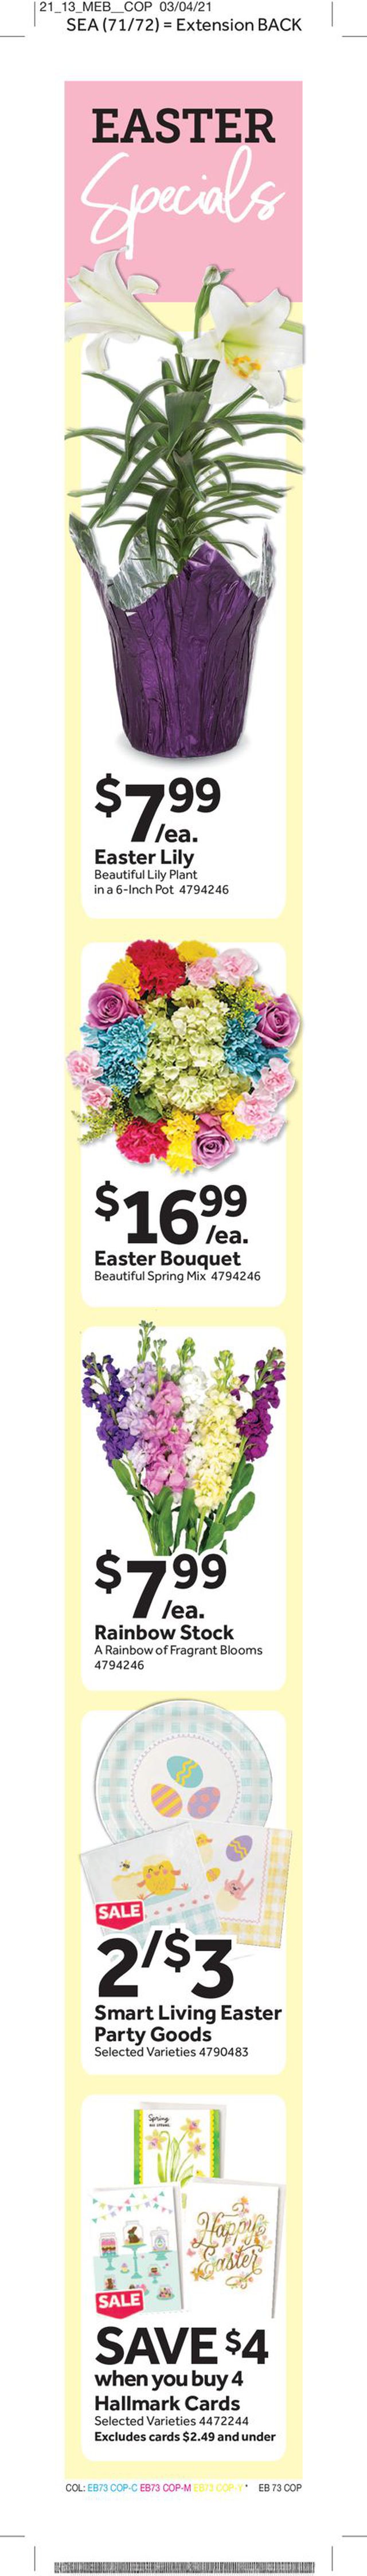 Stop and Shop Ad from 03/26/2021